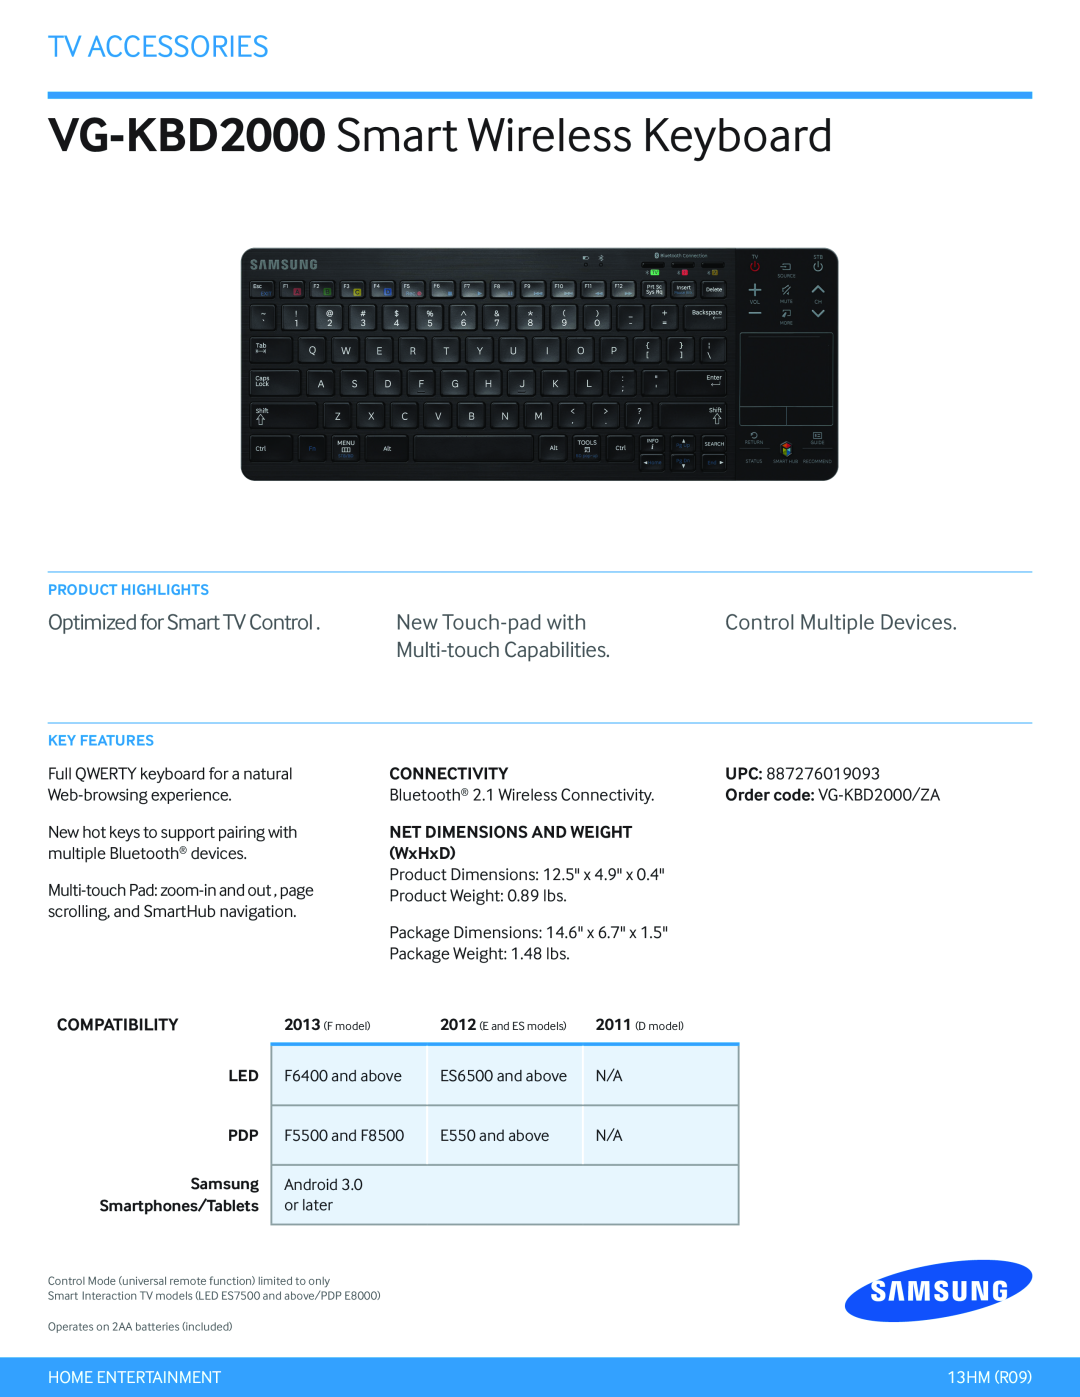 Samsung dimensions VG-KBD2000 Smart Wireless Keyboard, Tv Accessories, Optimized for Smart TV Control, Connectivity 